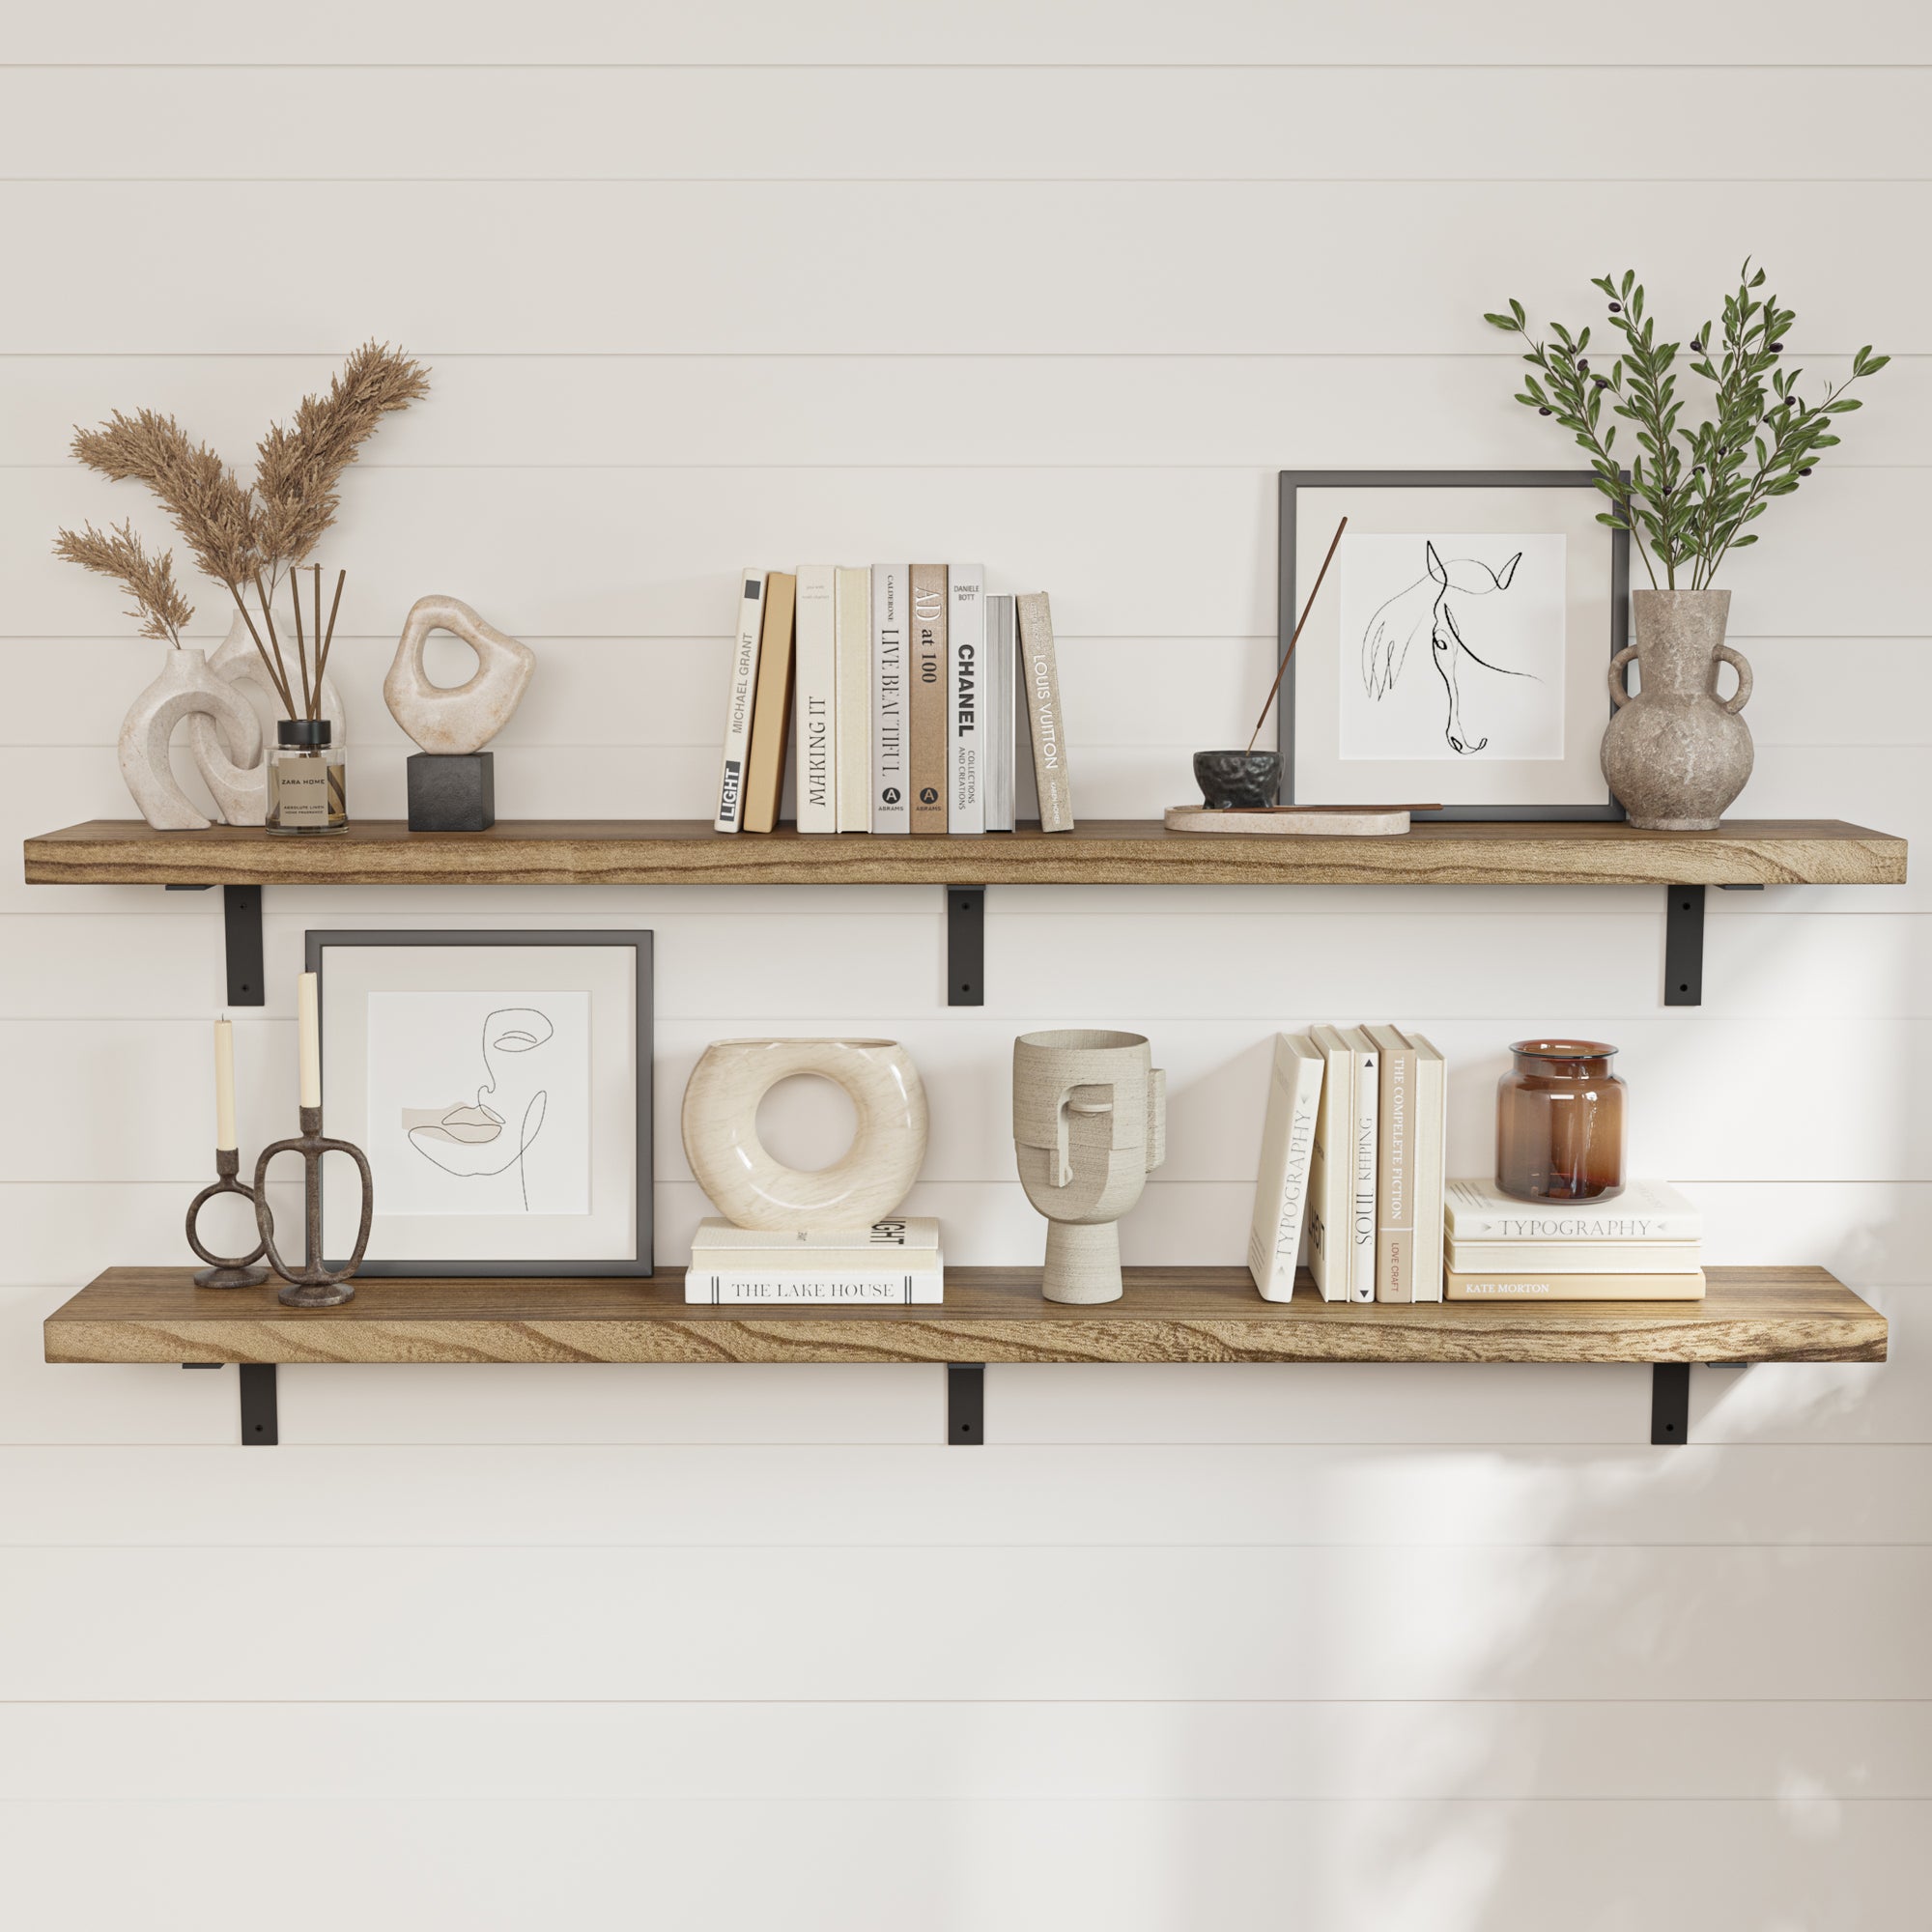 Rustic shelves setup with decorative objects, artwork, and books, against a white shiplap wall, creating a warm and inviting shelf decor & atmosphere.